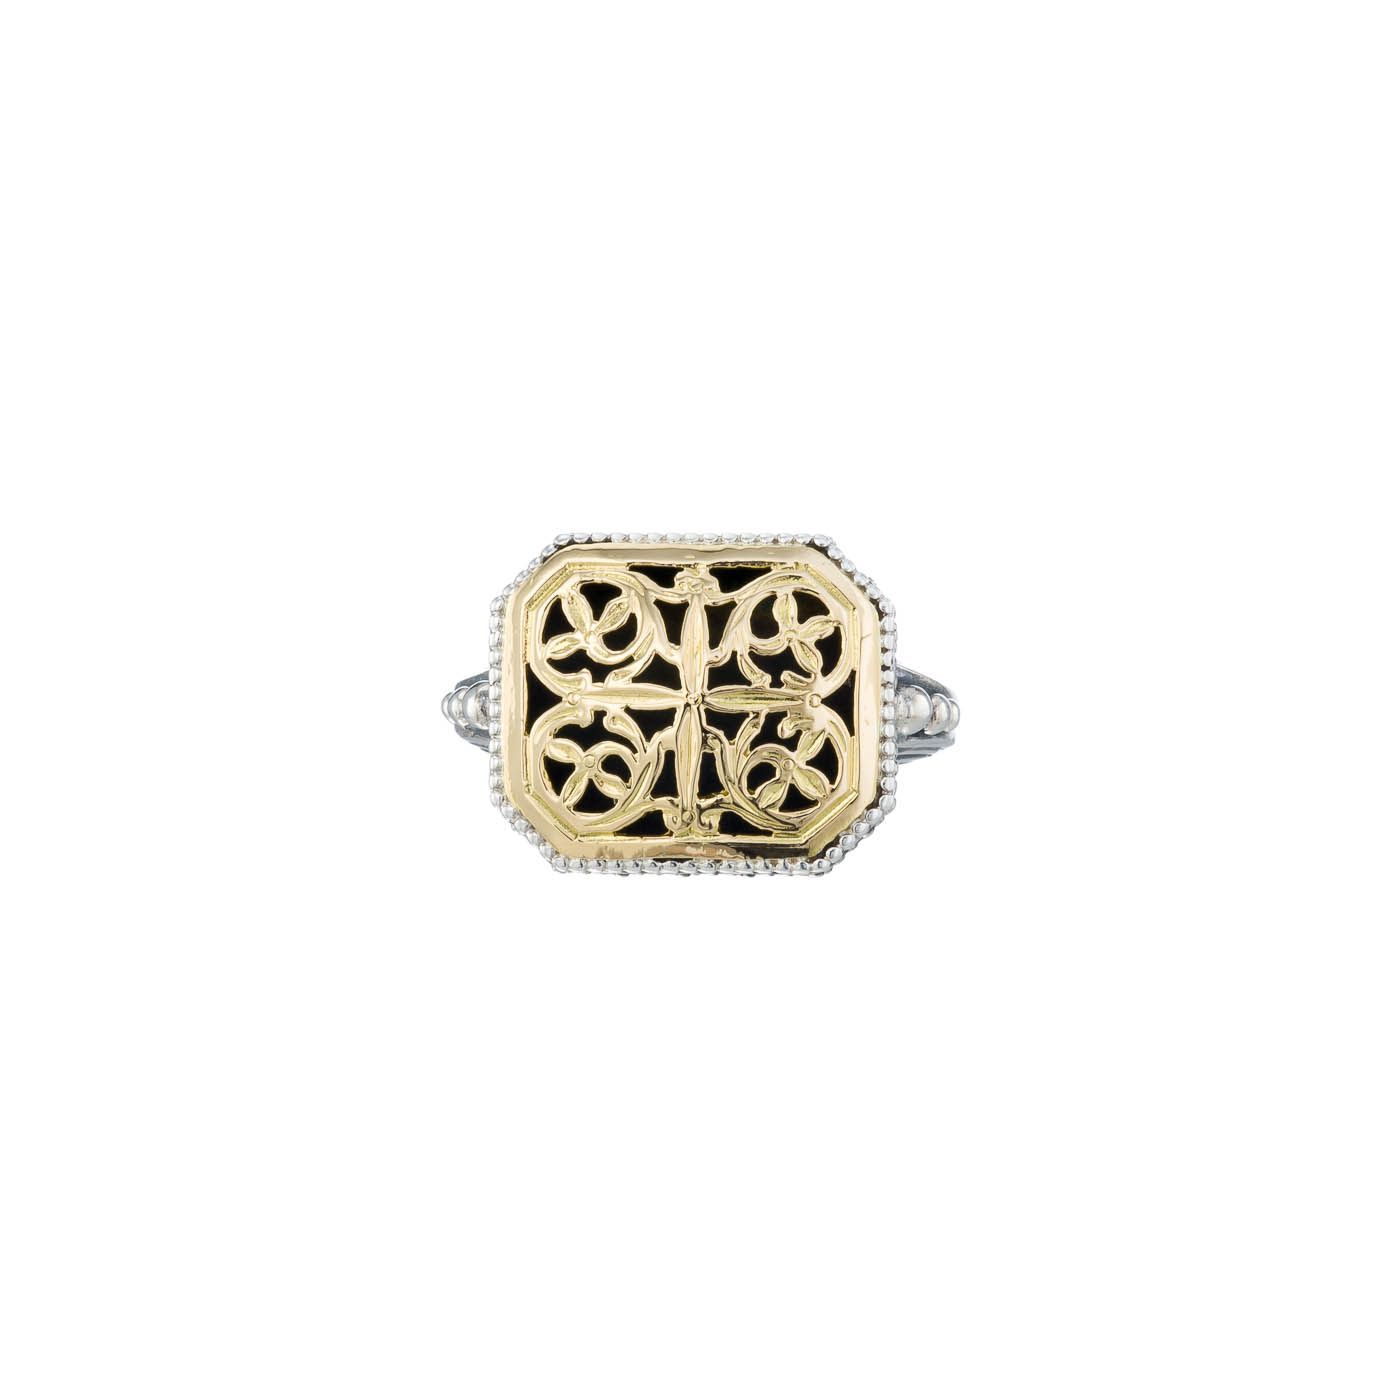 Garden shadows polygon ring in 18K Gold and Sterling Silver